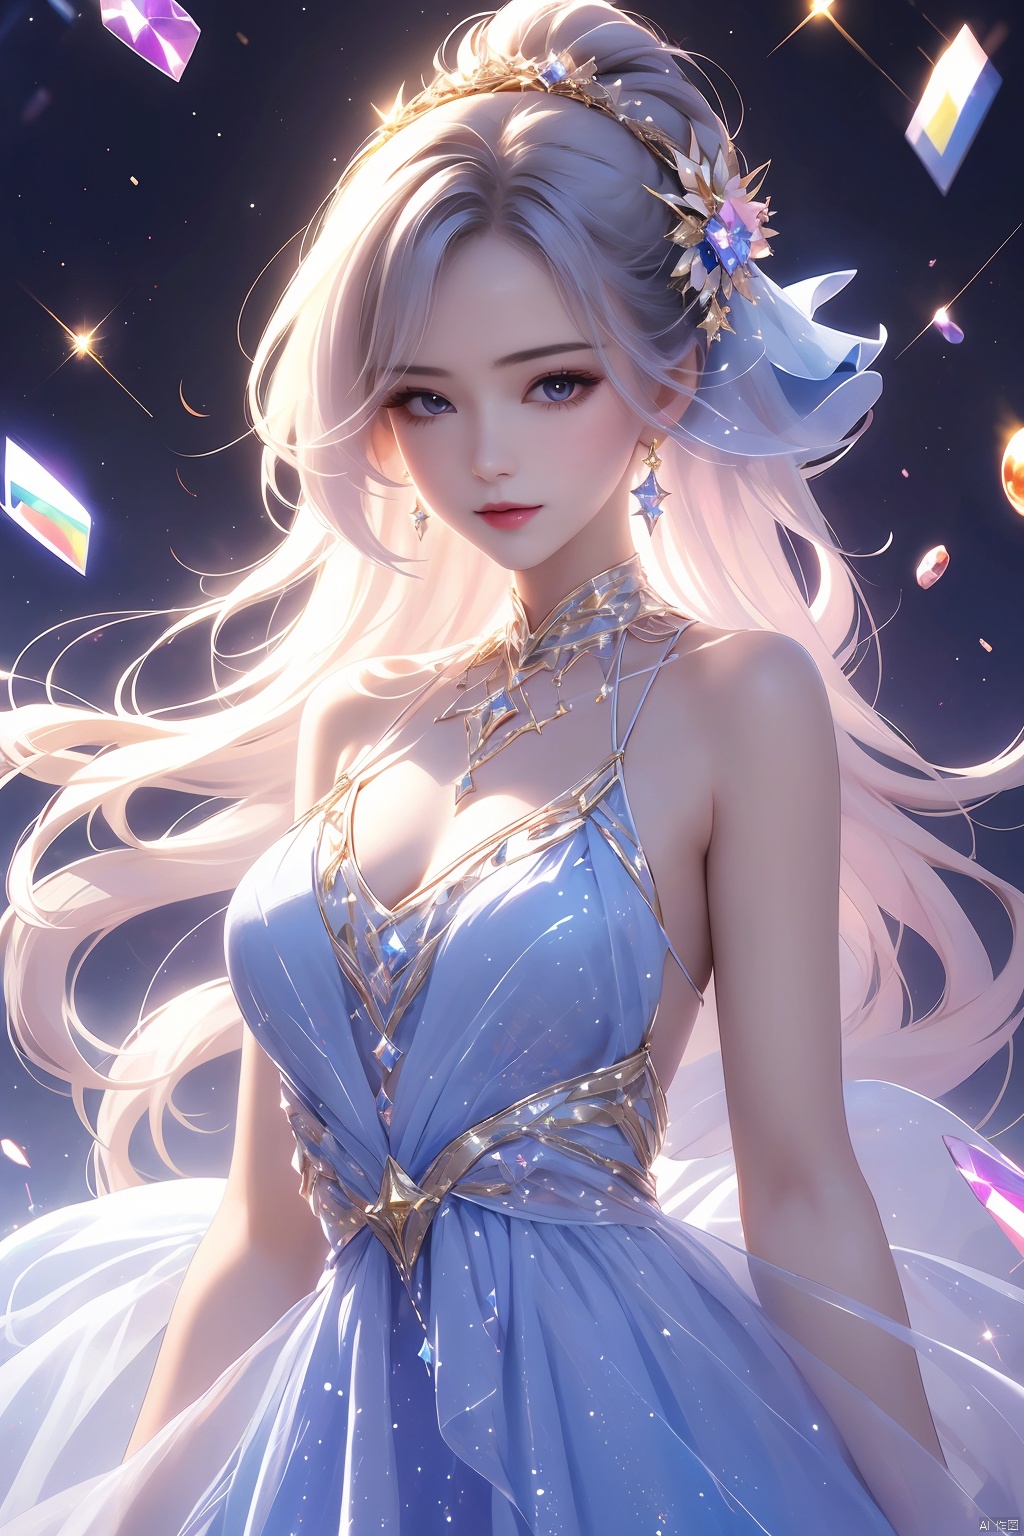  1 girl, glowing, dress, space,Sparkle, light particles